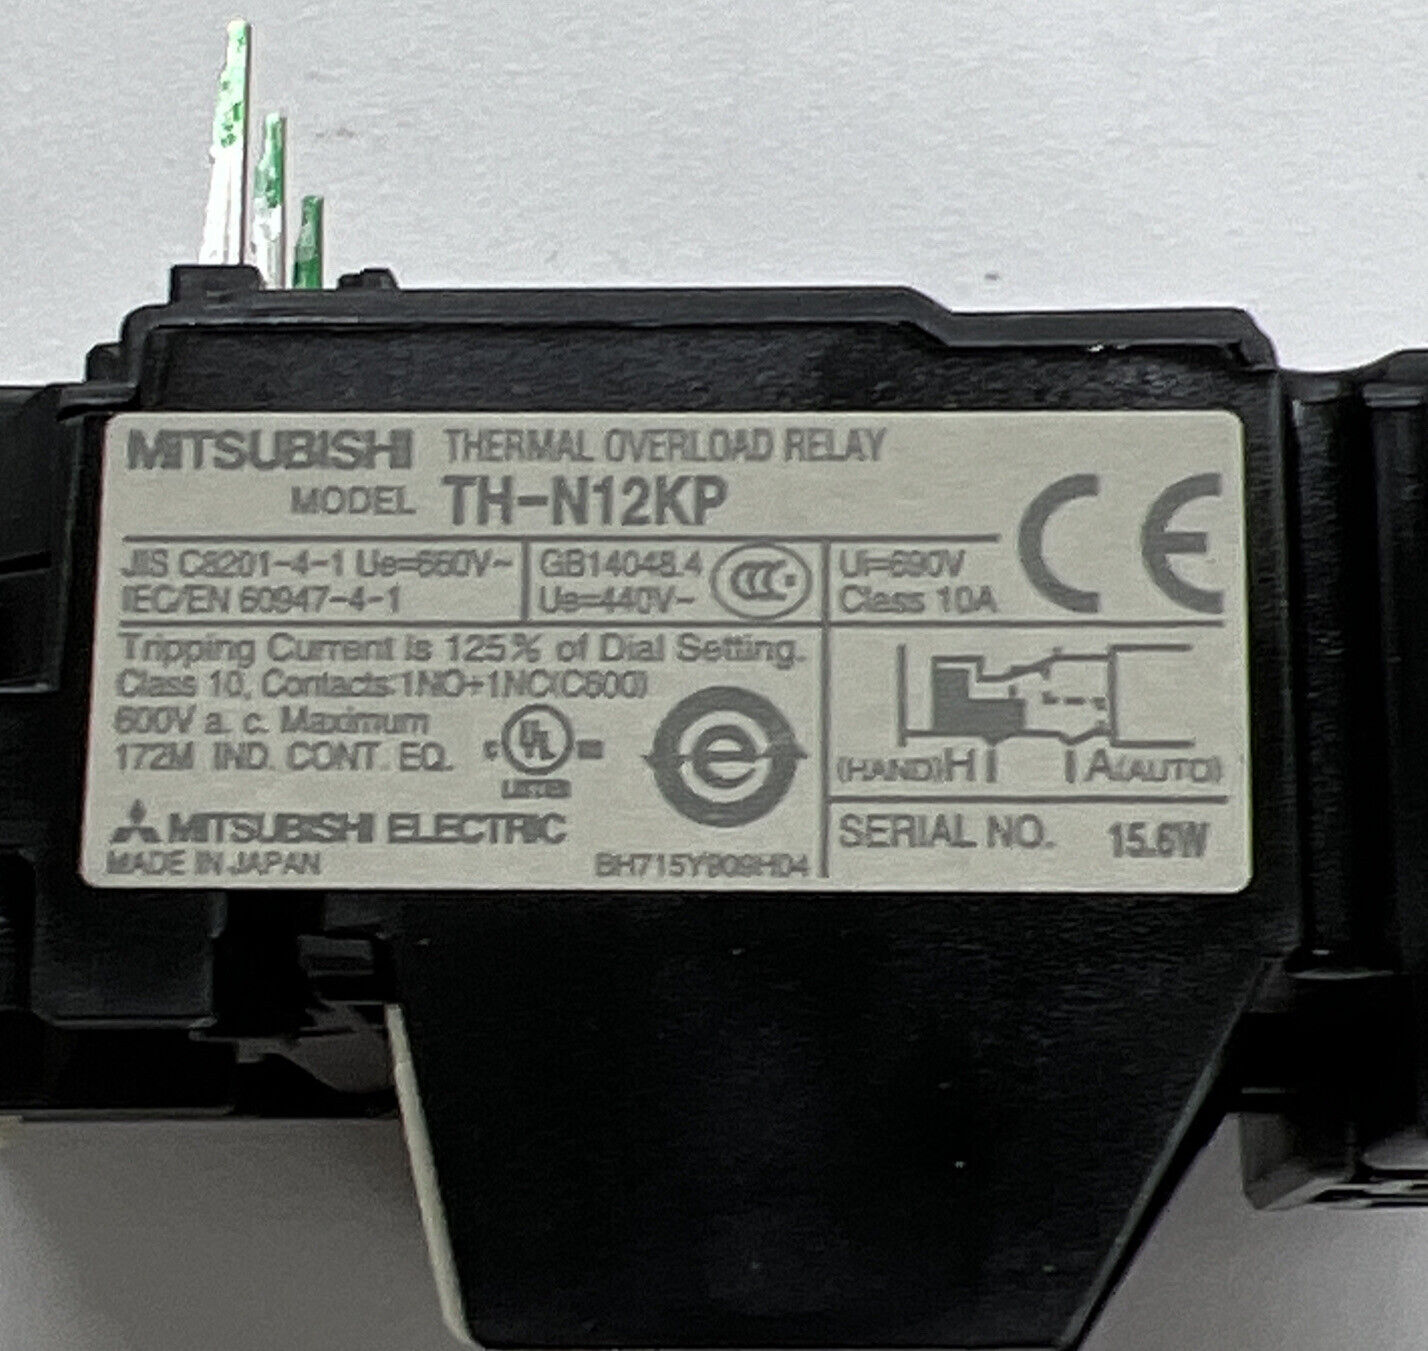 Mitsubishi TH-N12CXKP New Thermal Overload Relay Heater 1.7A 1.4-2.0A  (CL236)